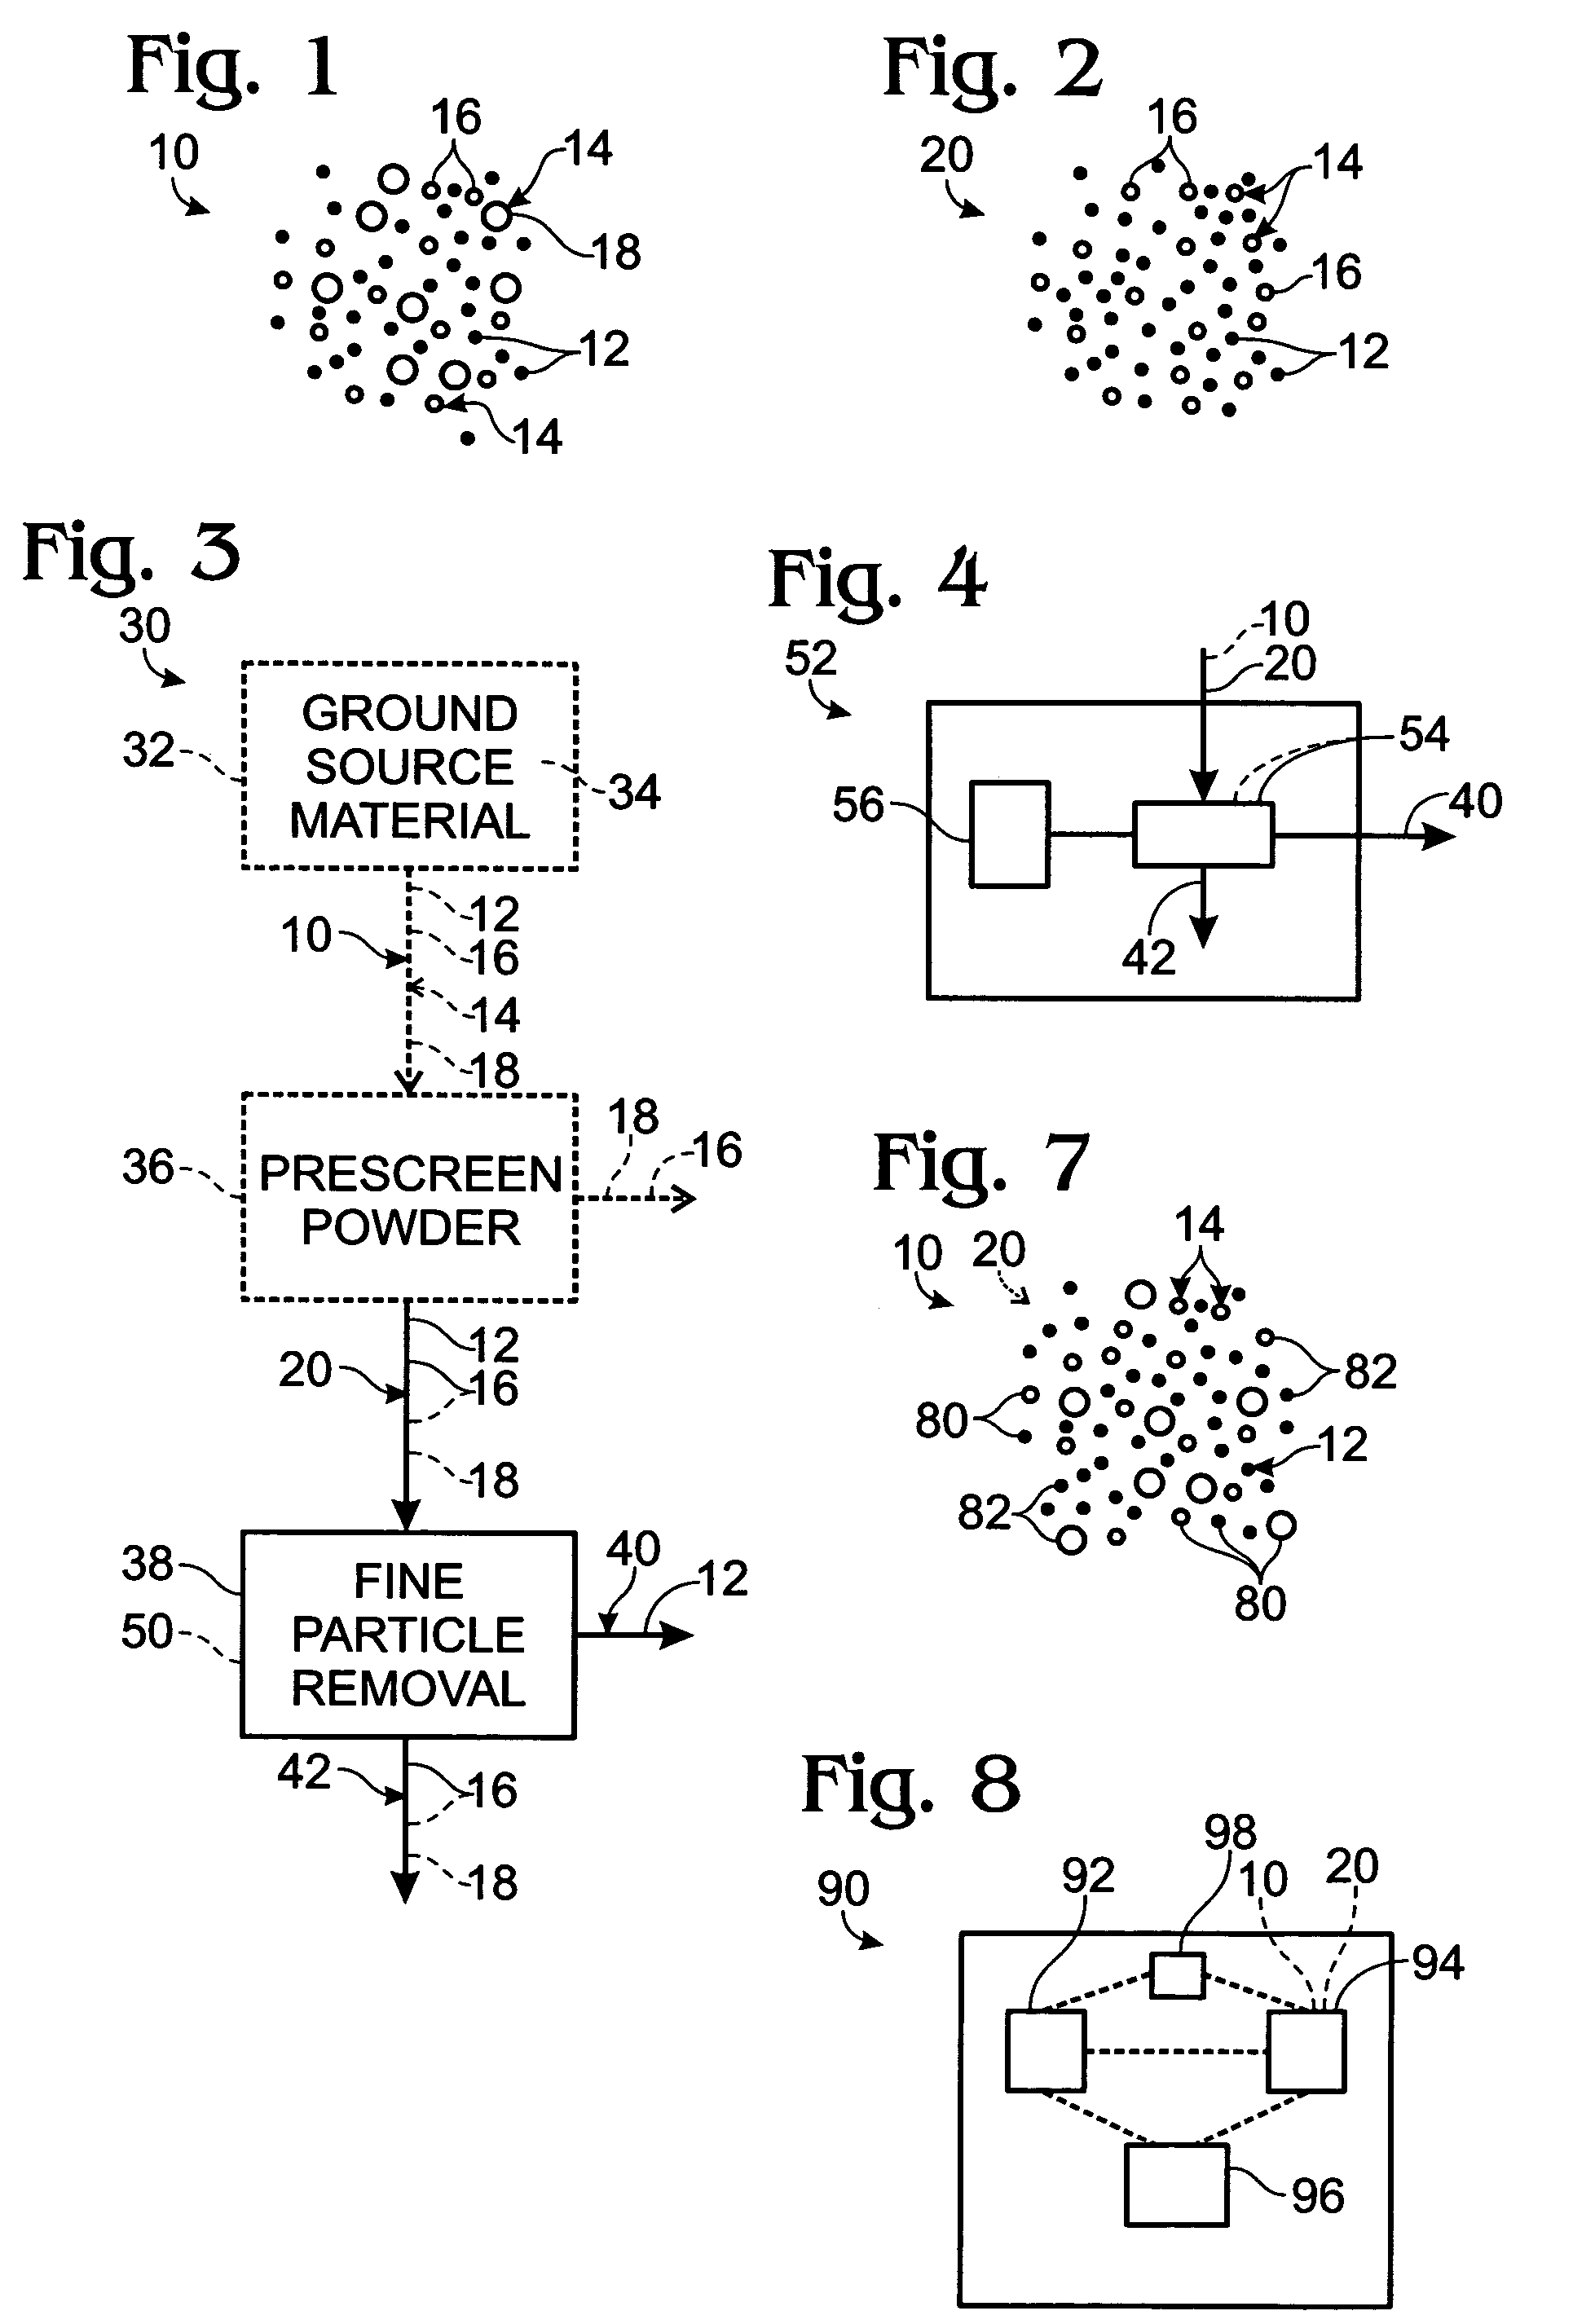 System and method for processing ferrotungsten and other tungsten alloys, articles formed therefrom and methods for detecting the same